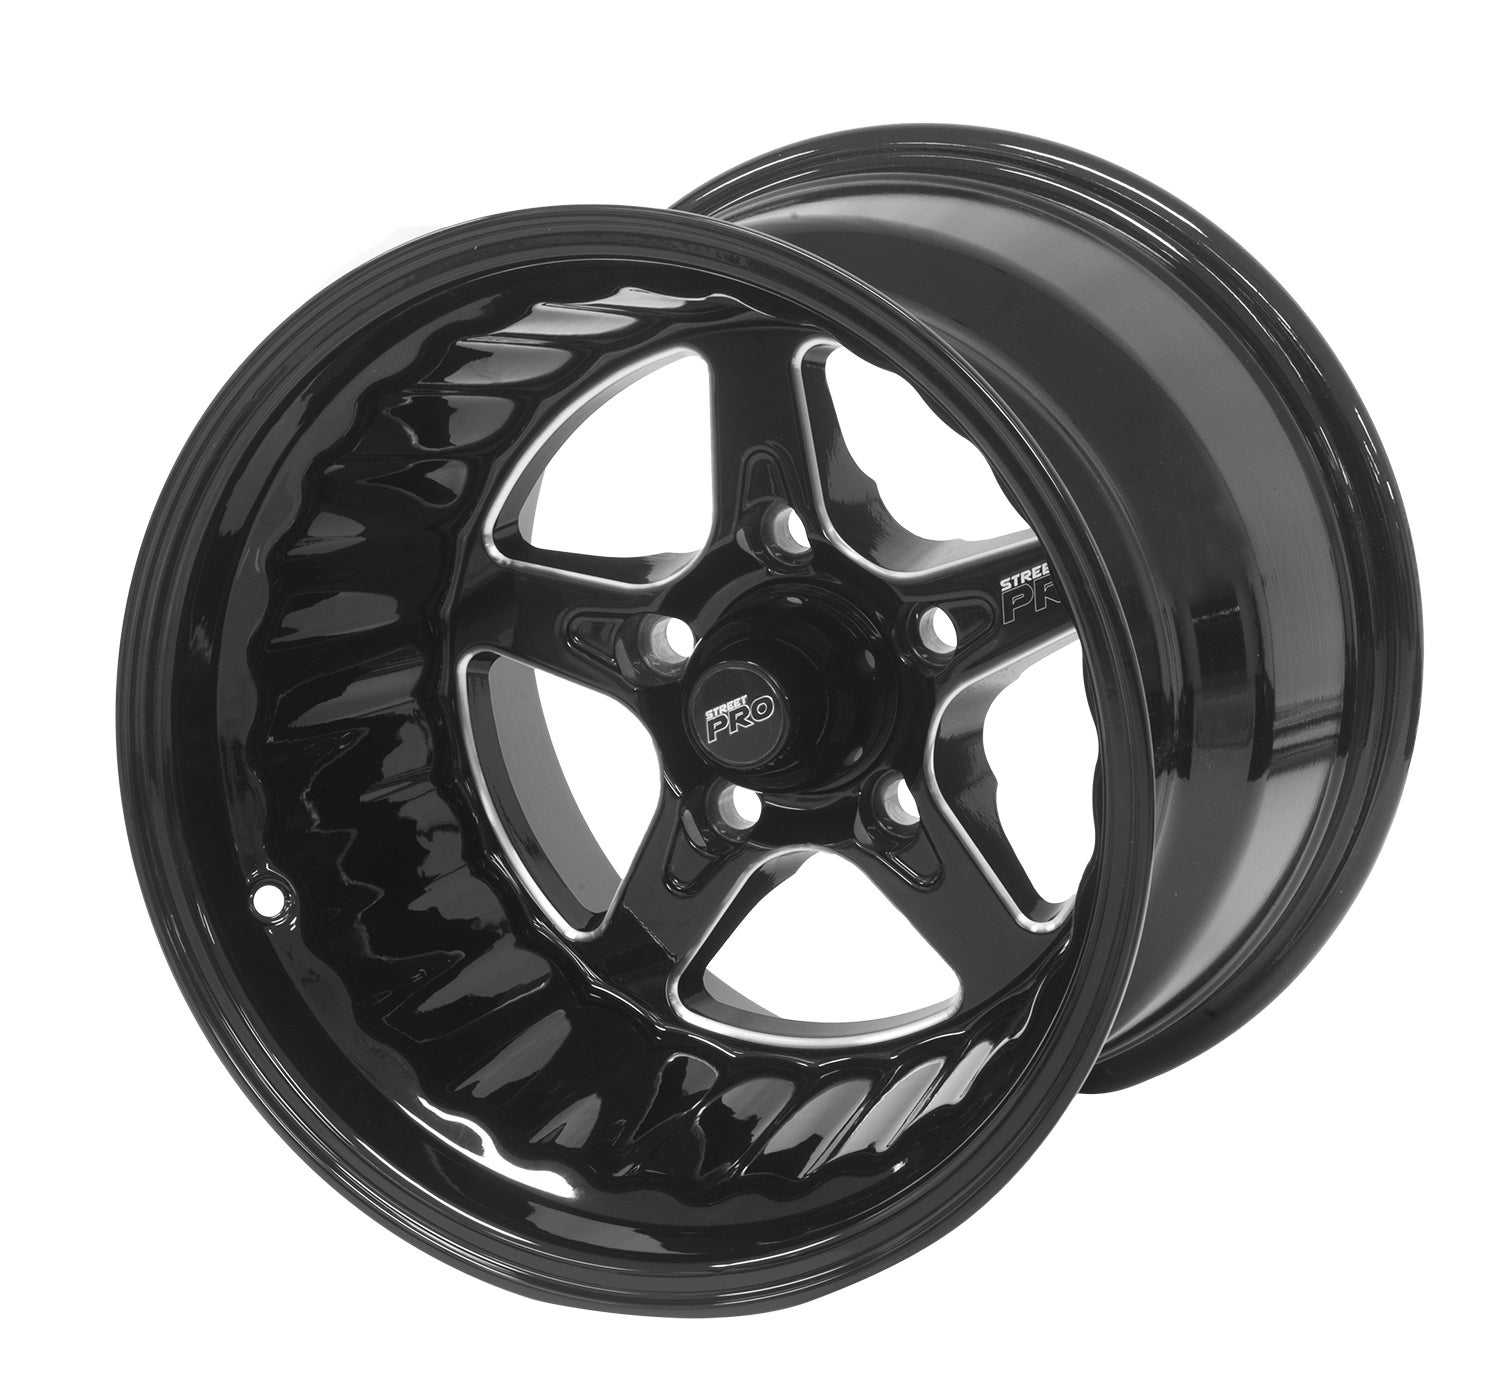 Street Pro Street Pro ll Convo Pro Wheel Black 15x12' For Ford Bolt Circle 5x 4.50' (-38) 5.00' Back Space